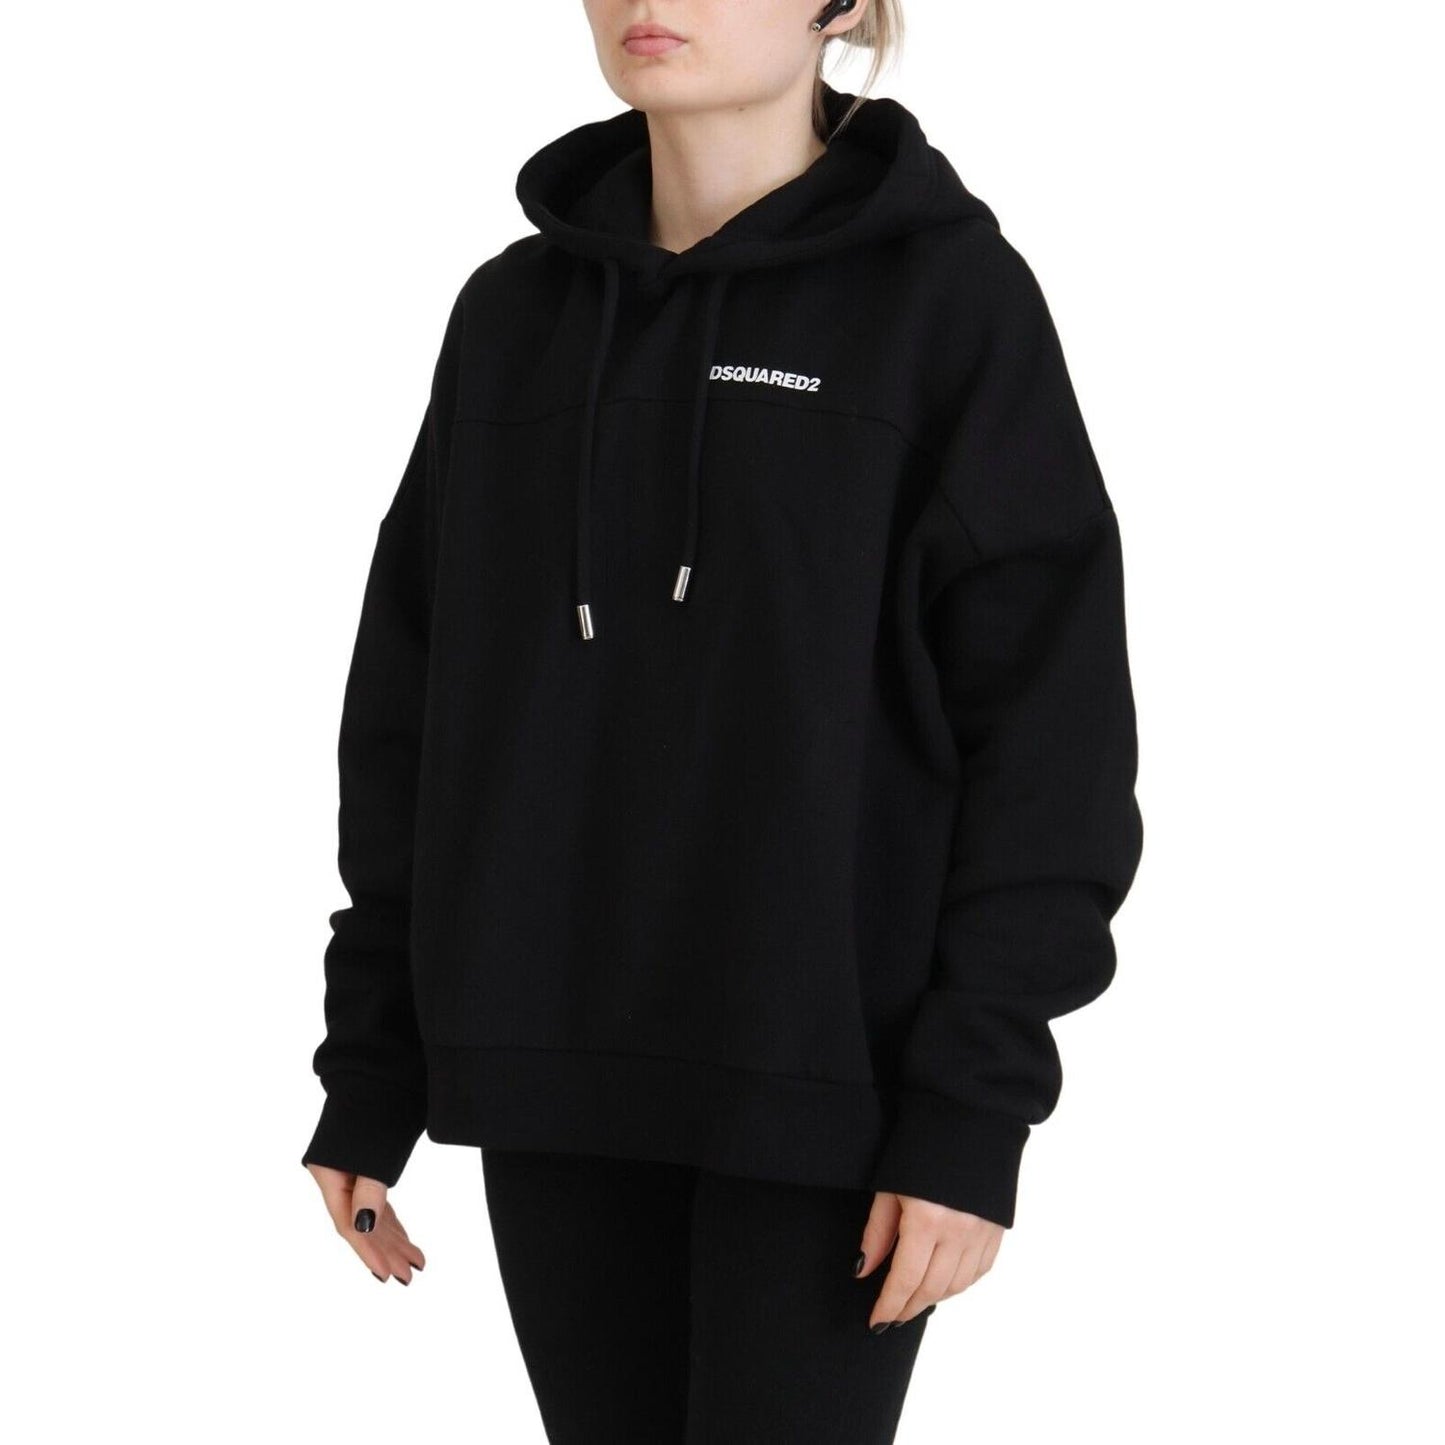 Dsquared² Black Logo Patch Cotton Hoodie Sweatshirt Sweater black-logo-patch-cotton-hoodie-sweatshirt-sweater